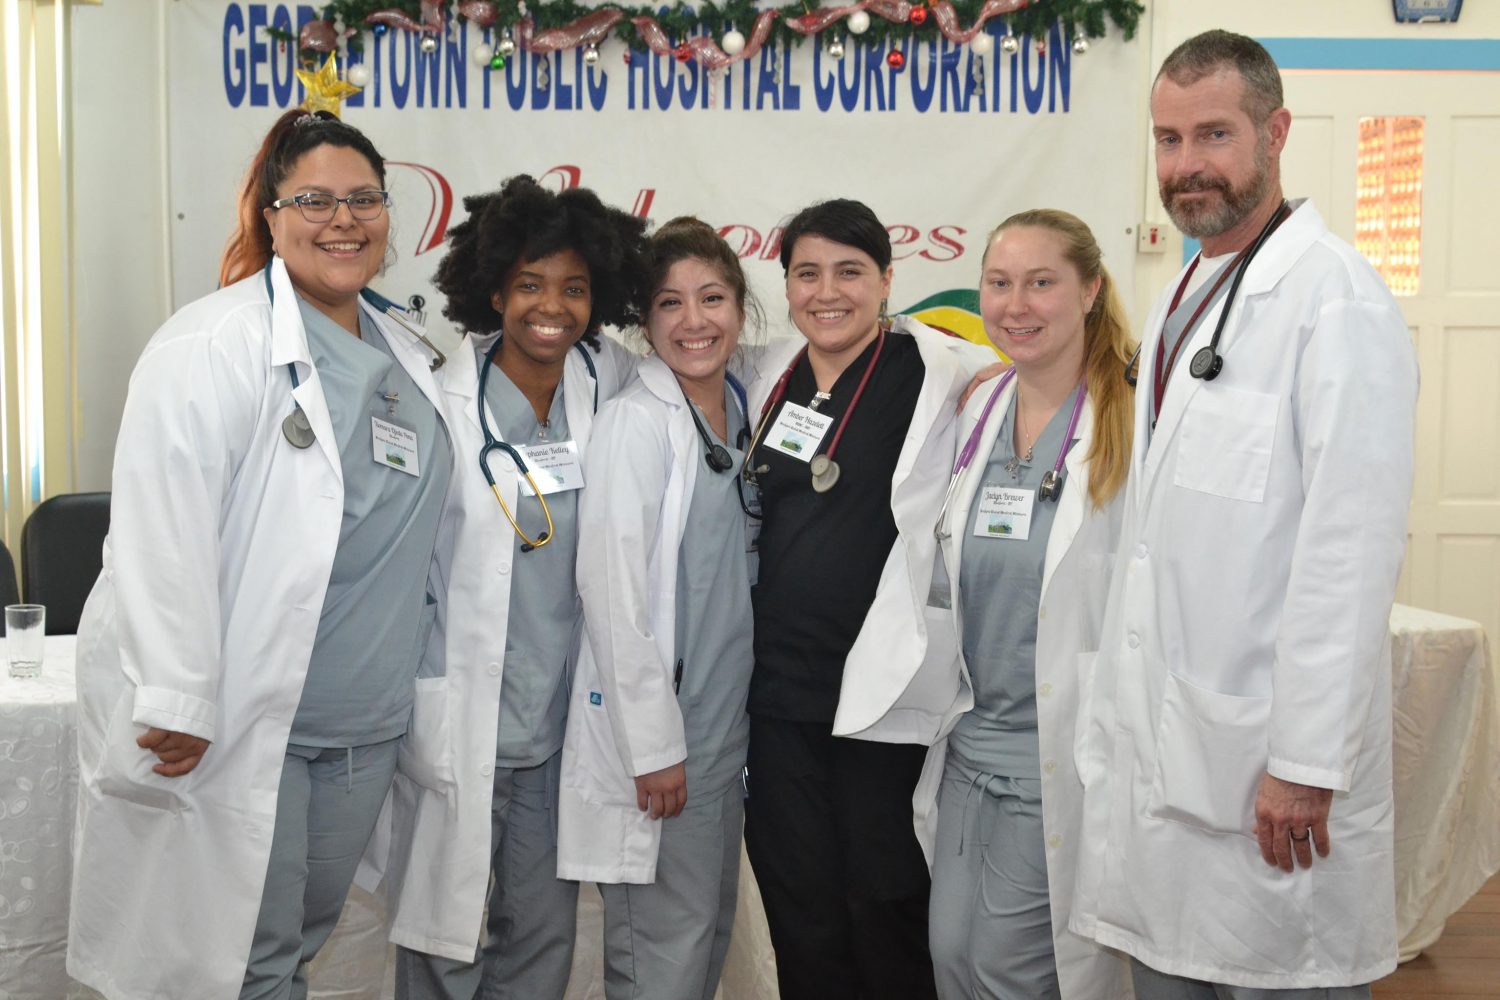 The team of respiratory care students along with one of the respiratory therapists of the Texas State University (DPI photo)